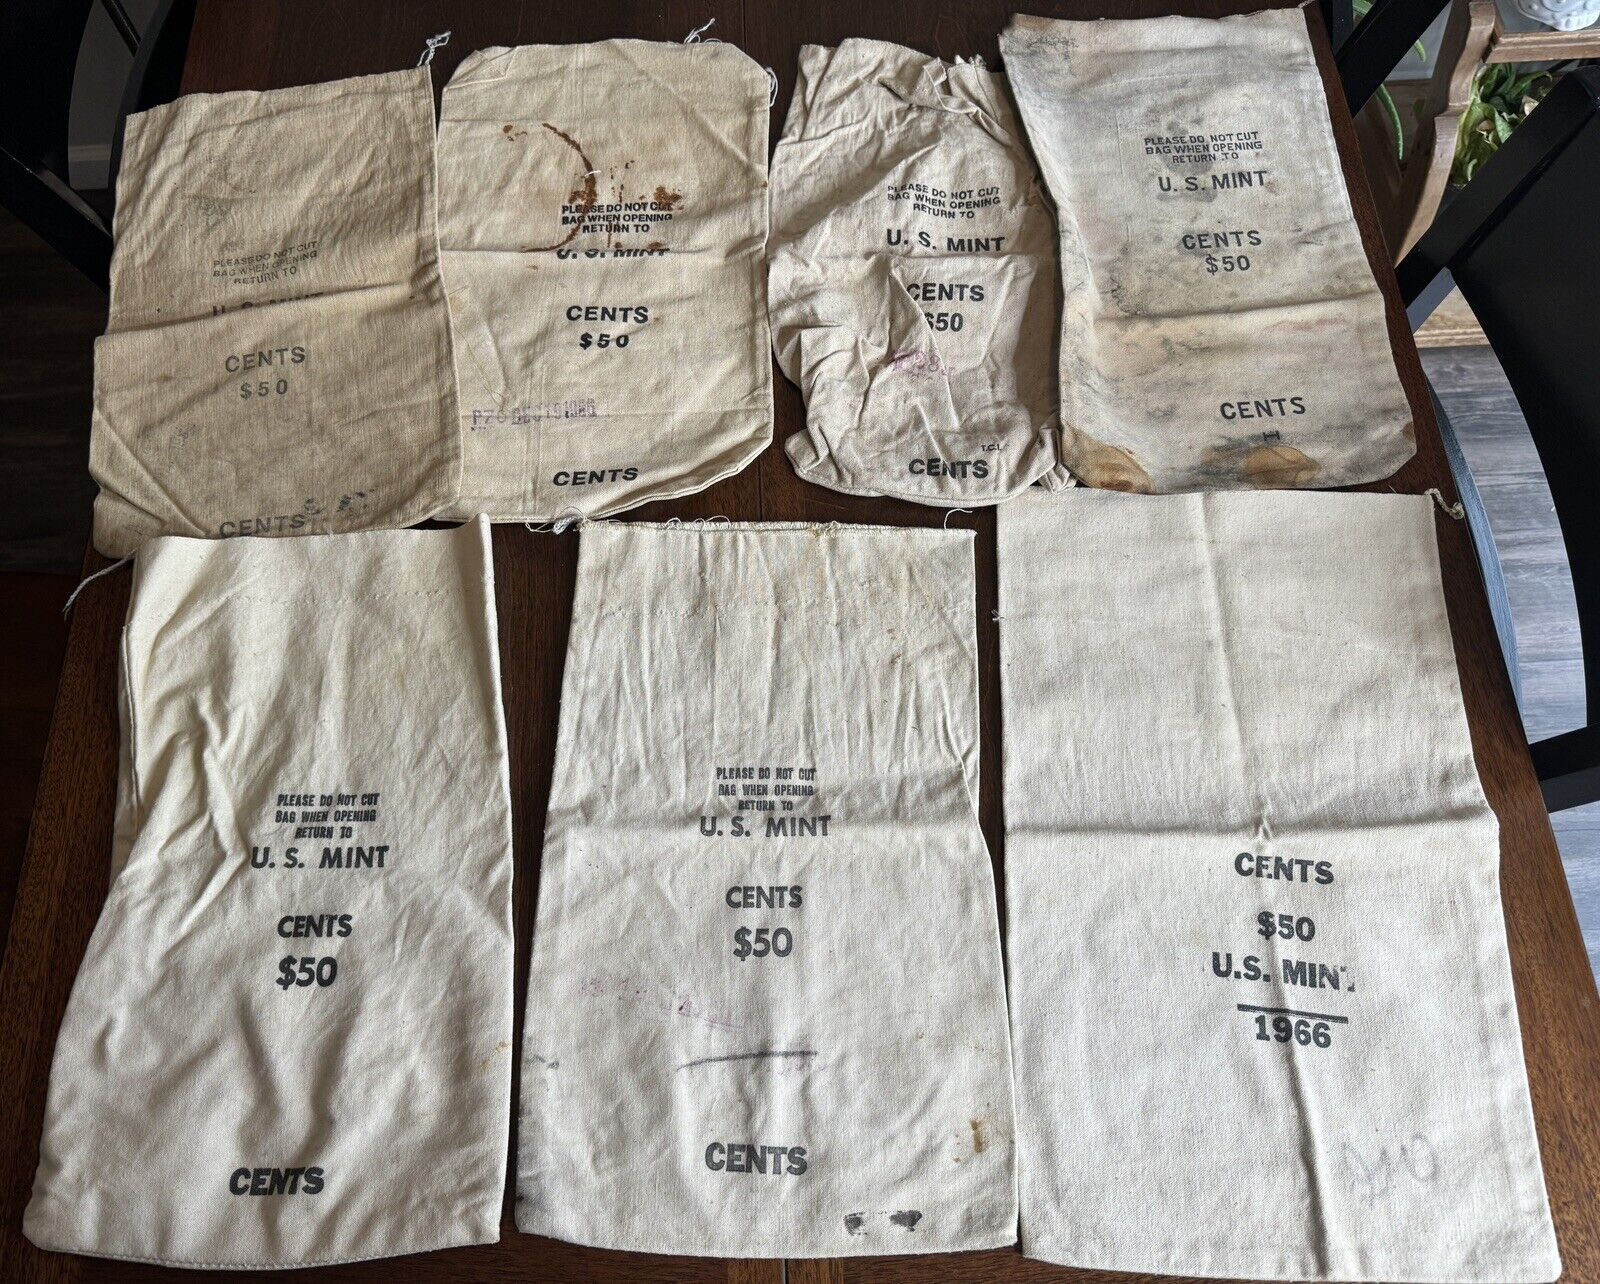 Lot of SEVEN EMPTY U.S. MINT CENTS $50 CANVAS COIN BAGS (1966)